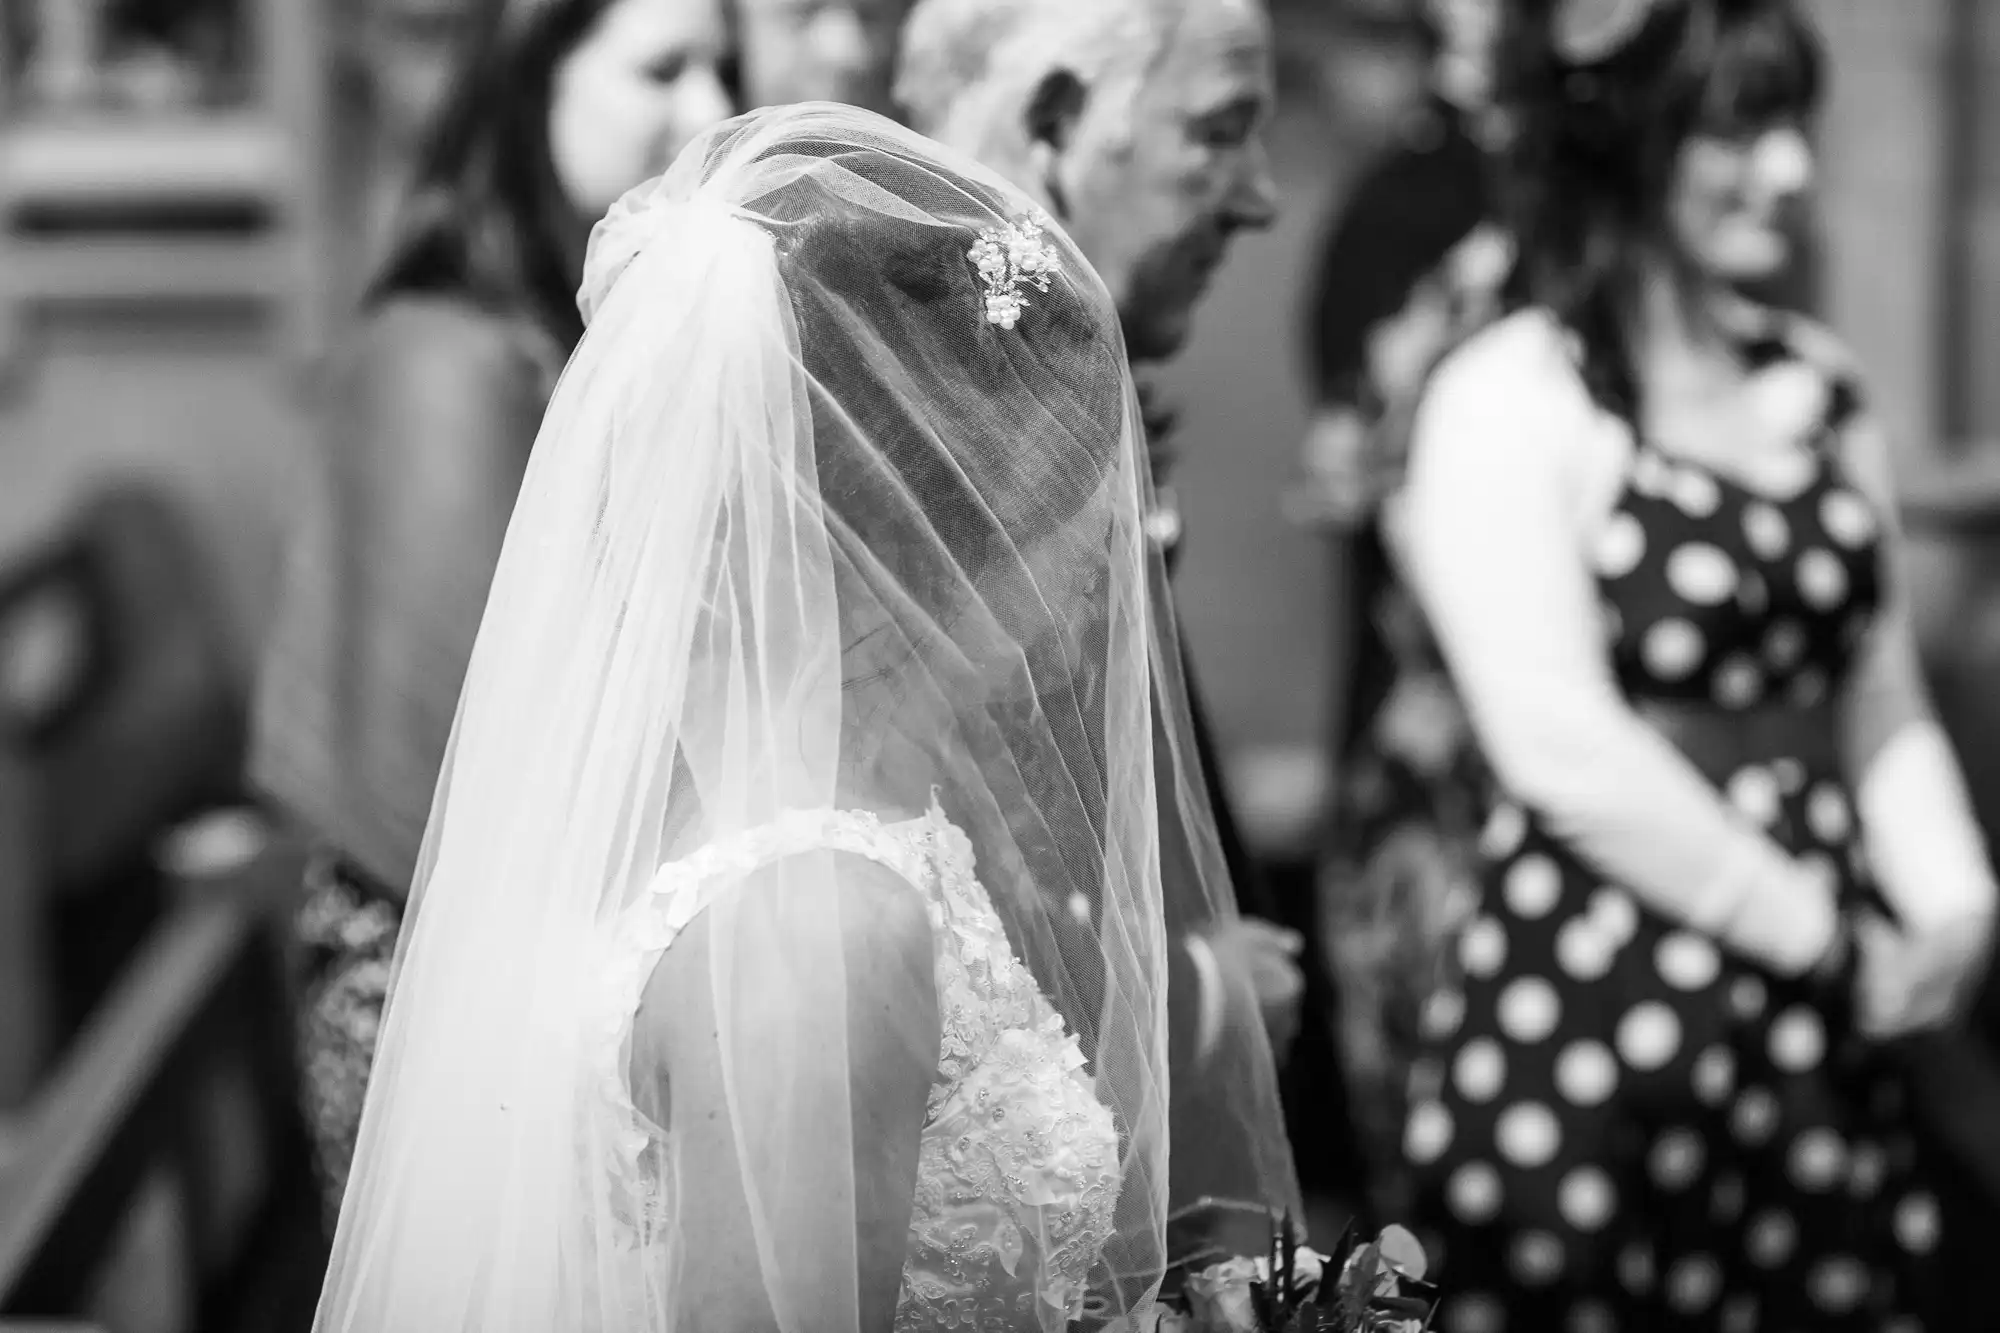 A bride wearing a veil and a wedding dress in a crowd of people at a wedding ceremony, picture in black and white.